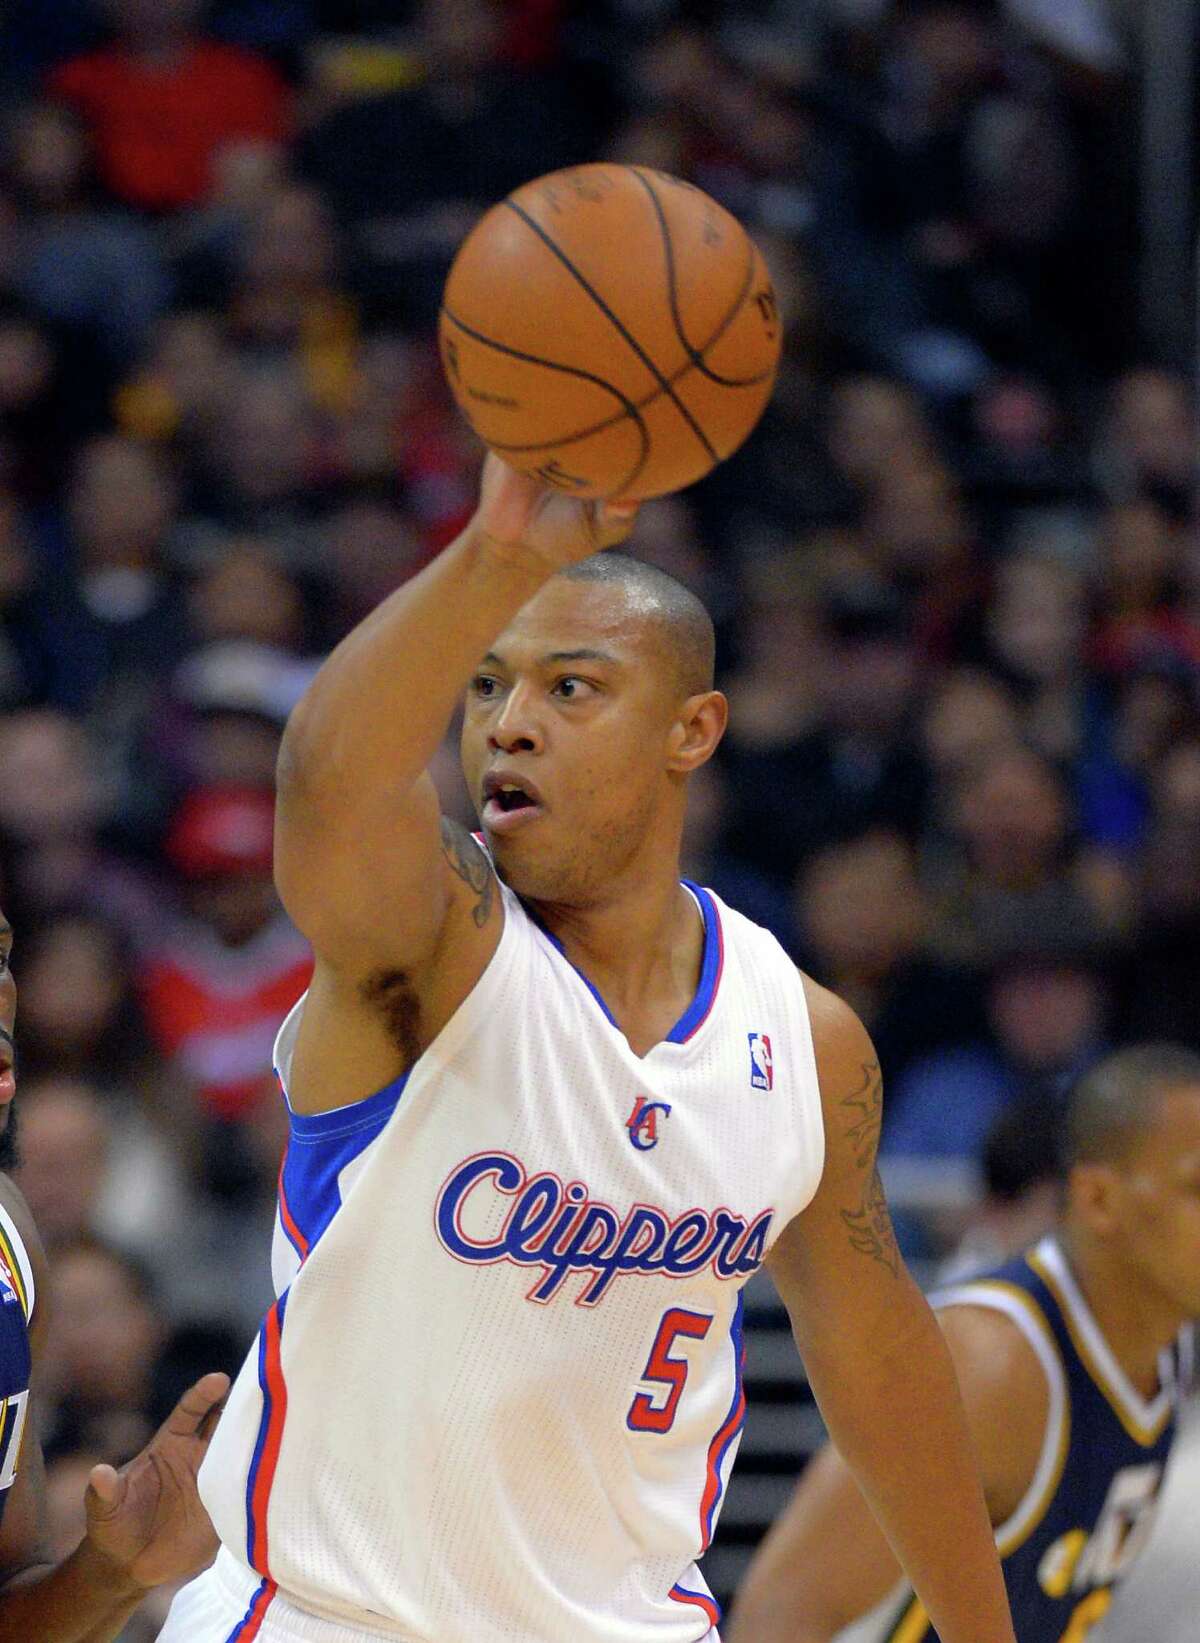 Los Angeles Clippers forward Caron Butler passes during the first half of their NBA basketball game against the Utah Jazz, Sunday, Dec. 30, 2012, in Los Angeles. (AP Photo/Mark J. Terrill)